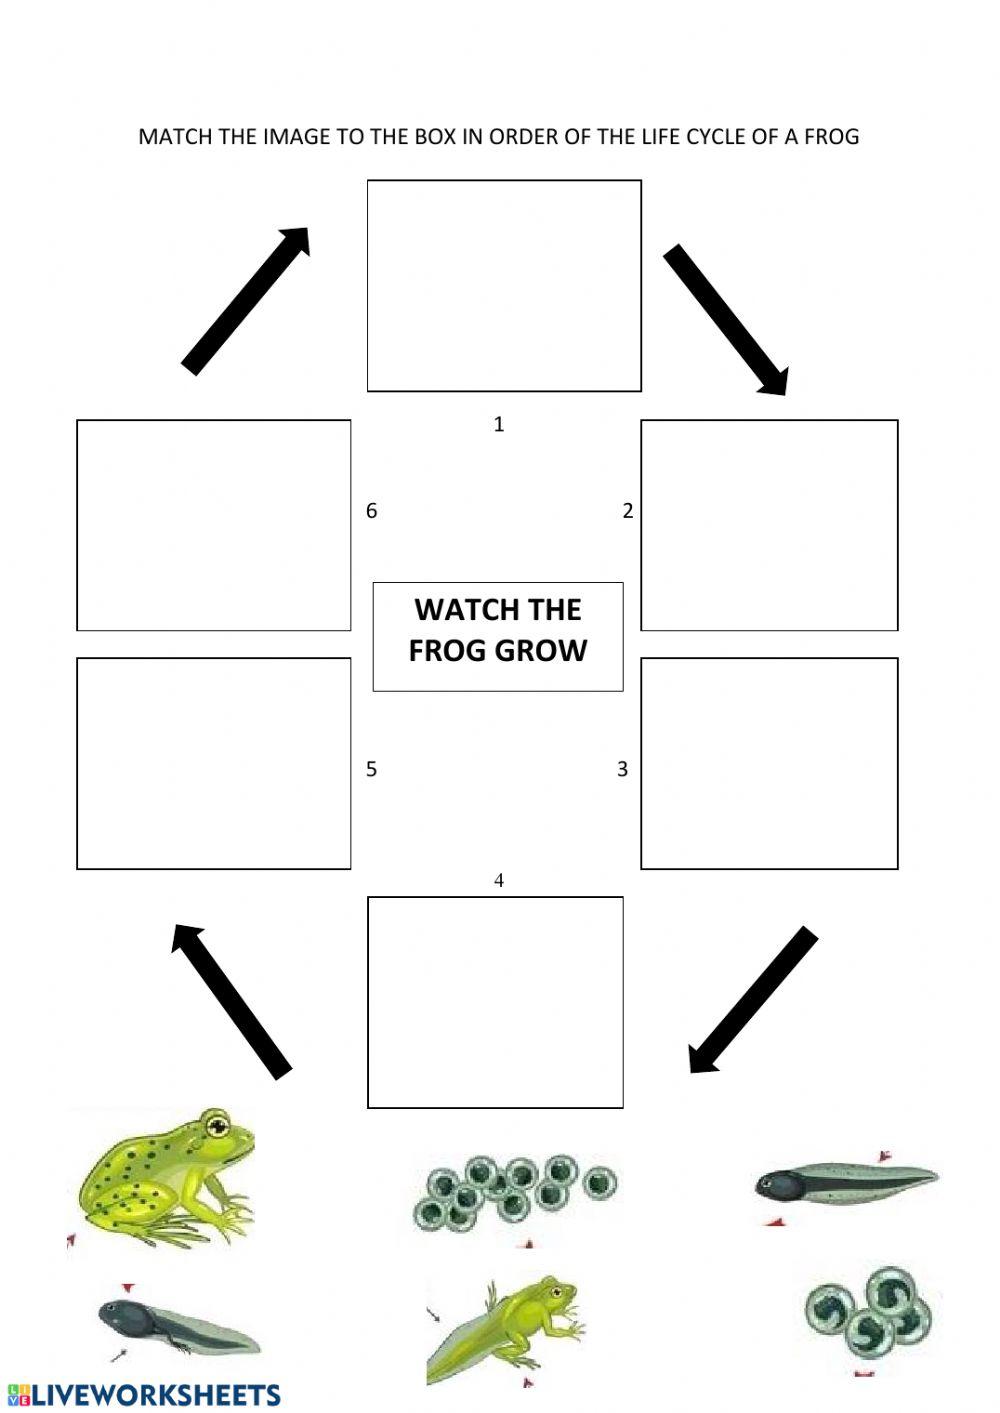 Life cycle of a frog